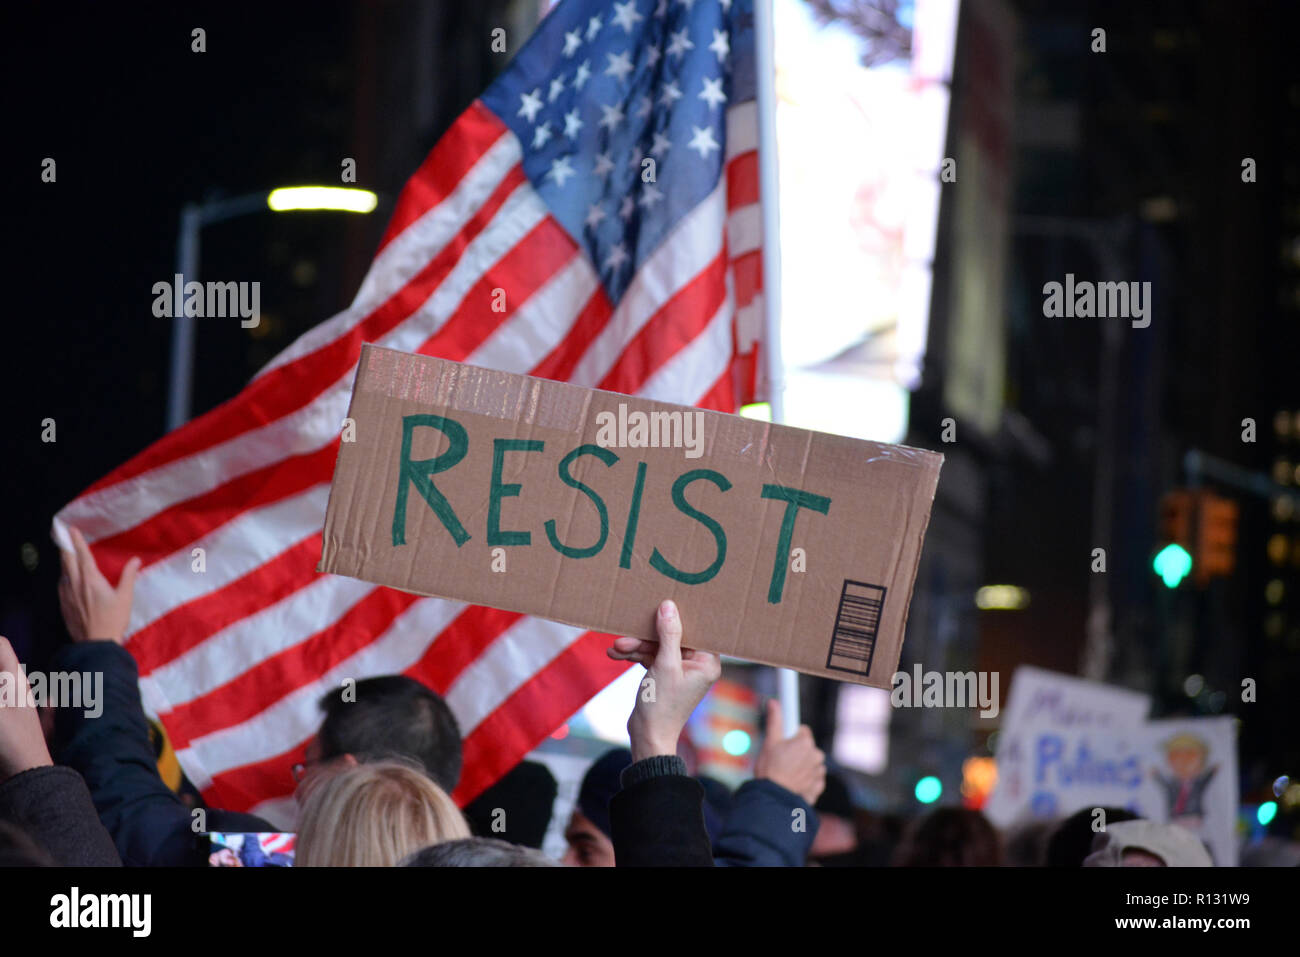 New York, USA. 8th November, 2018. Protesters gathered in Times Square over President Trump's firing of Attorney General Jeff Sessions and to support special counsel Robert Mueller. Credit: Christopher Penler/Alamy Live News Stock Photo